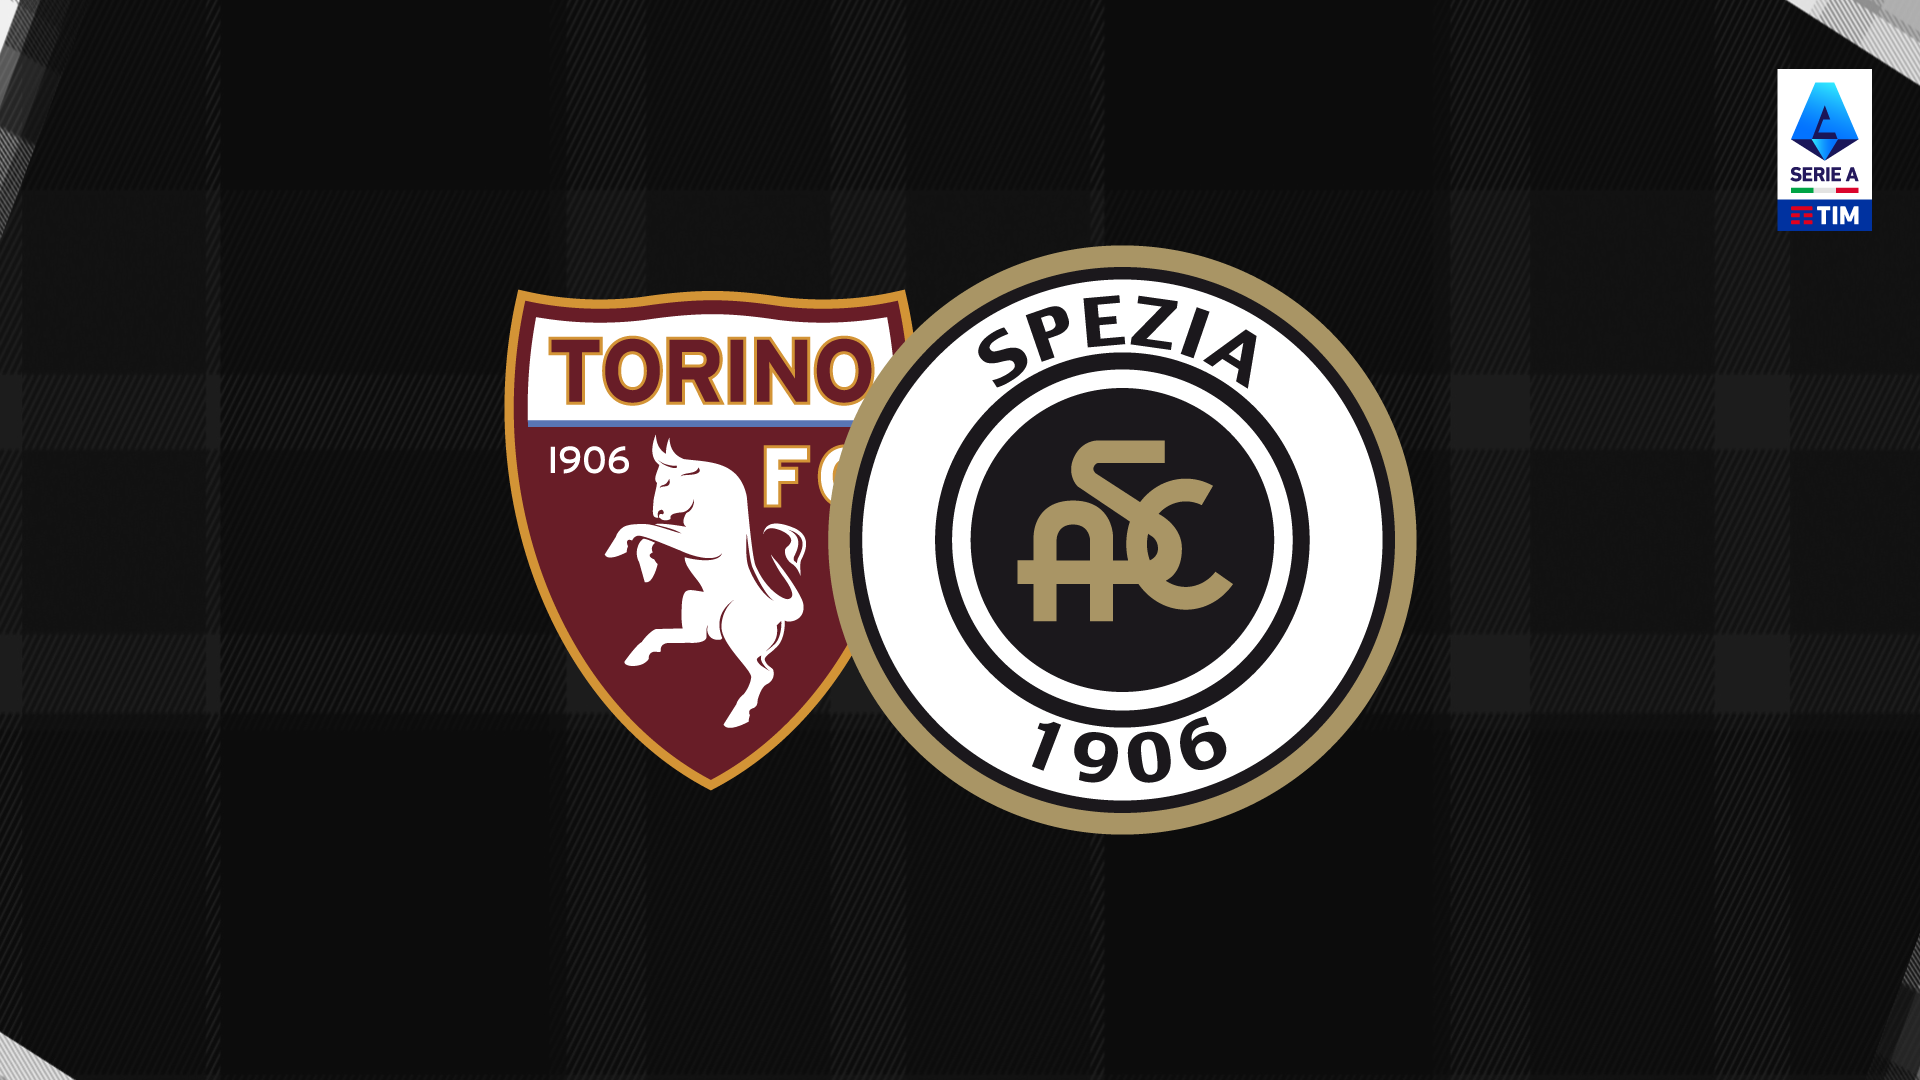 Torino-Spezia: active sale for the guest sector